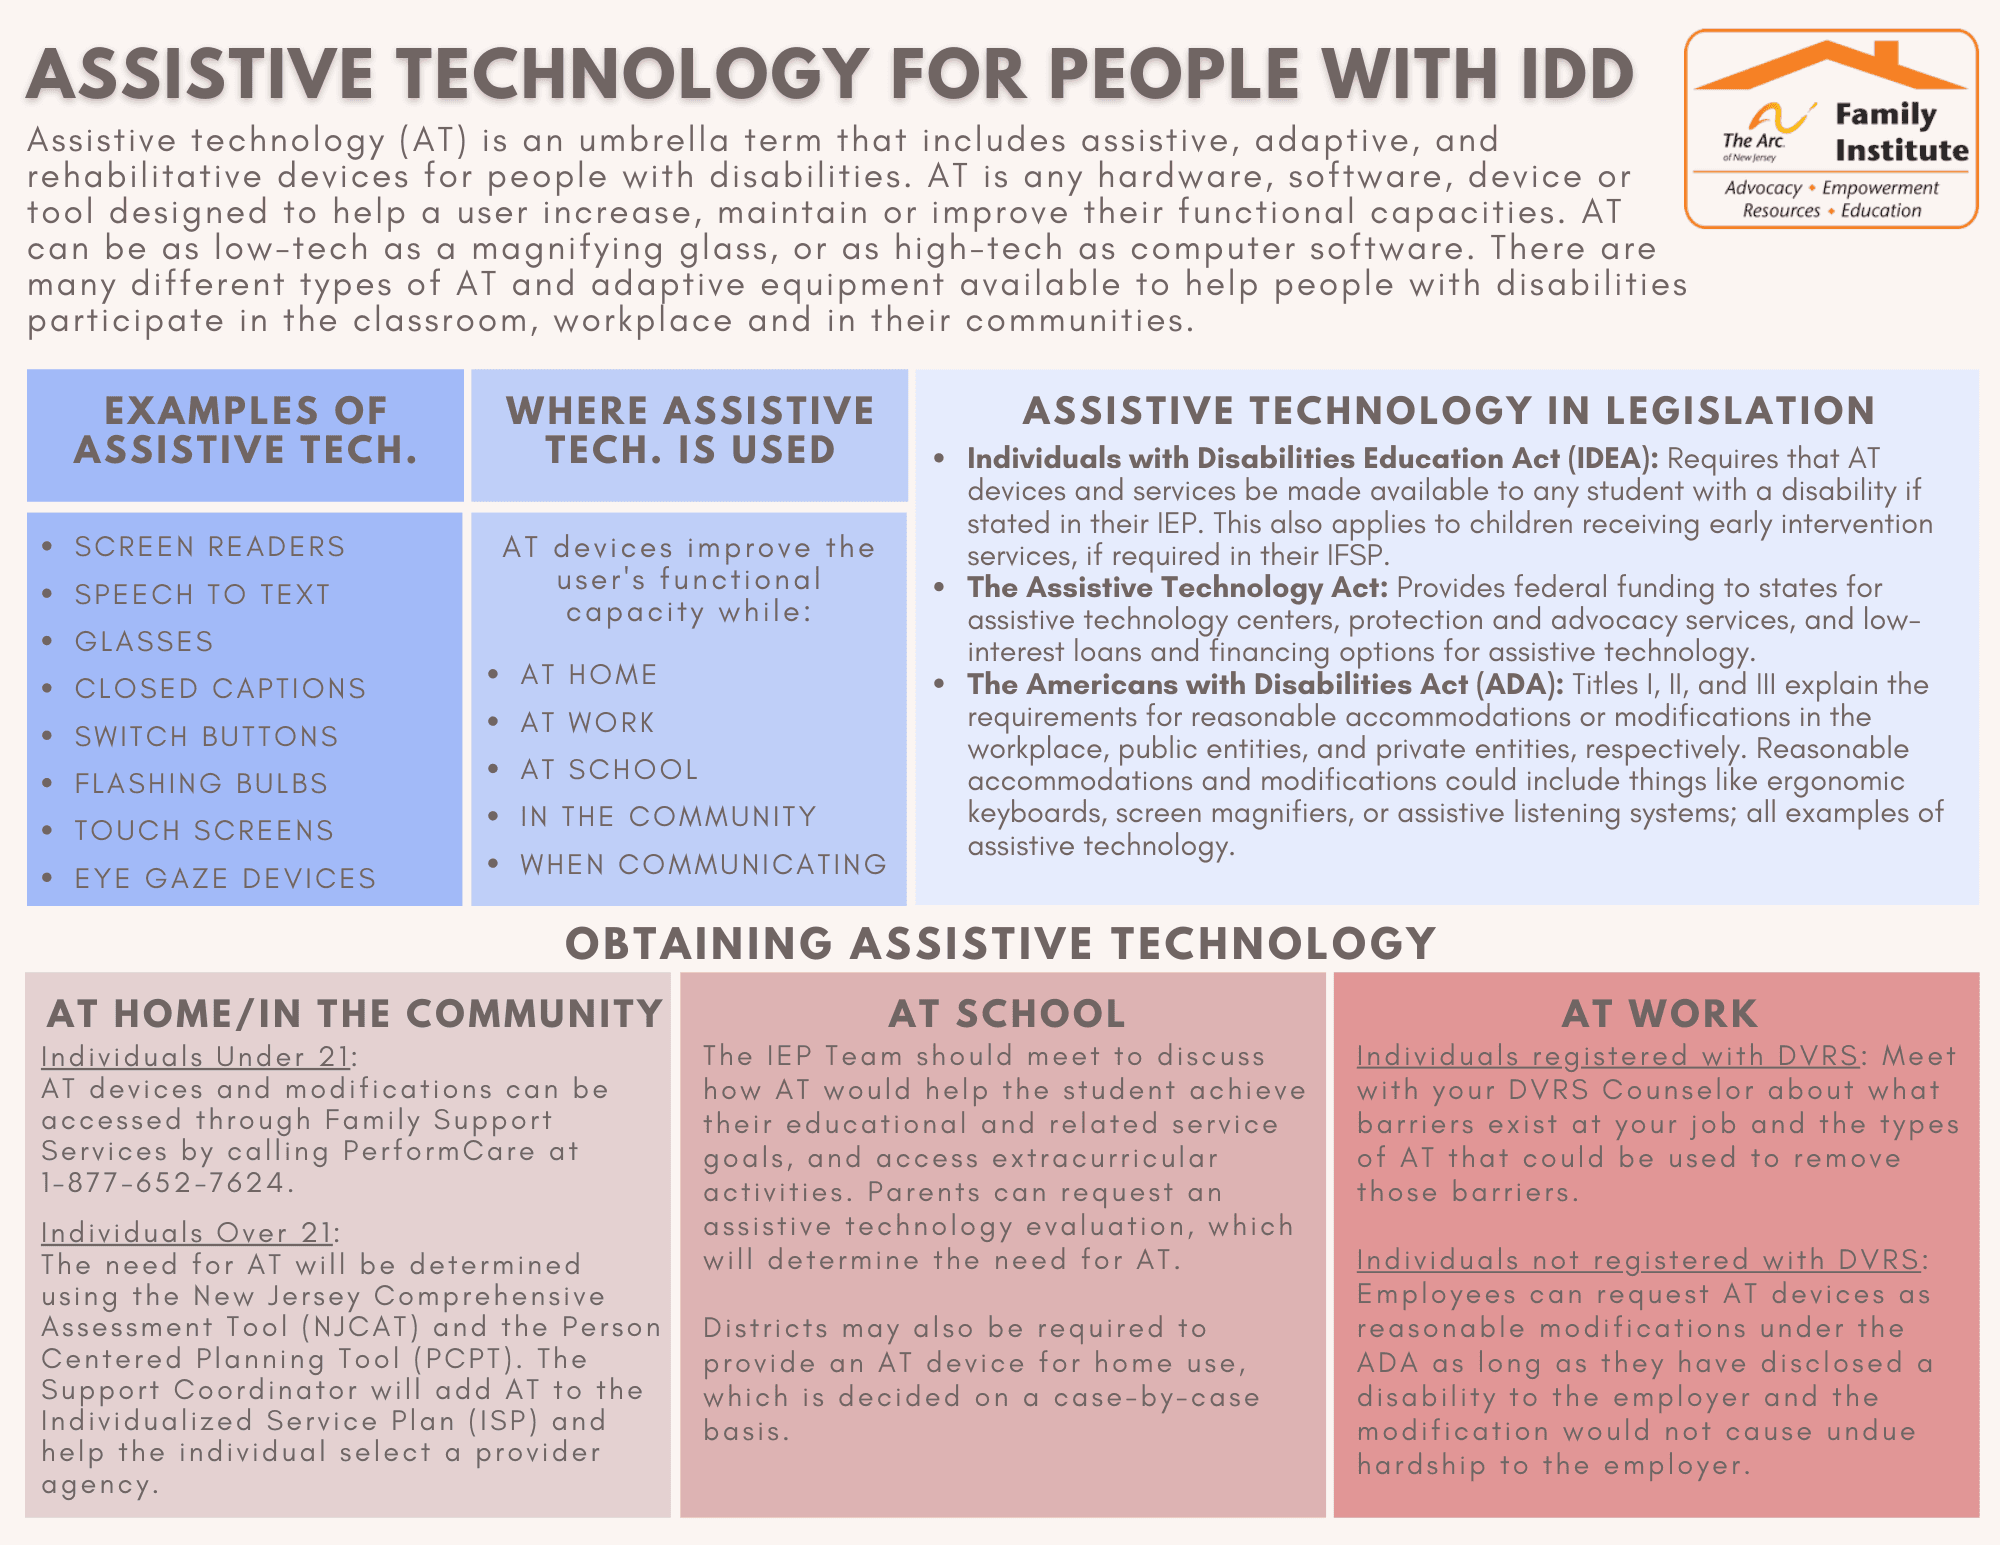 Assistive Technology for People with IDD Fact Sheet